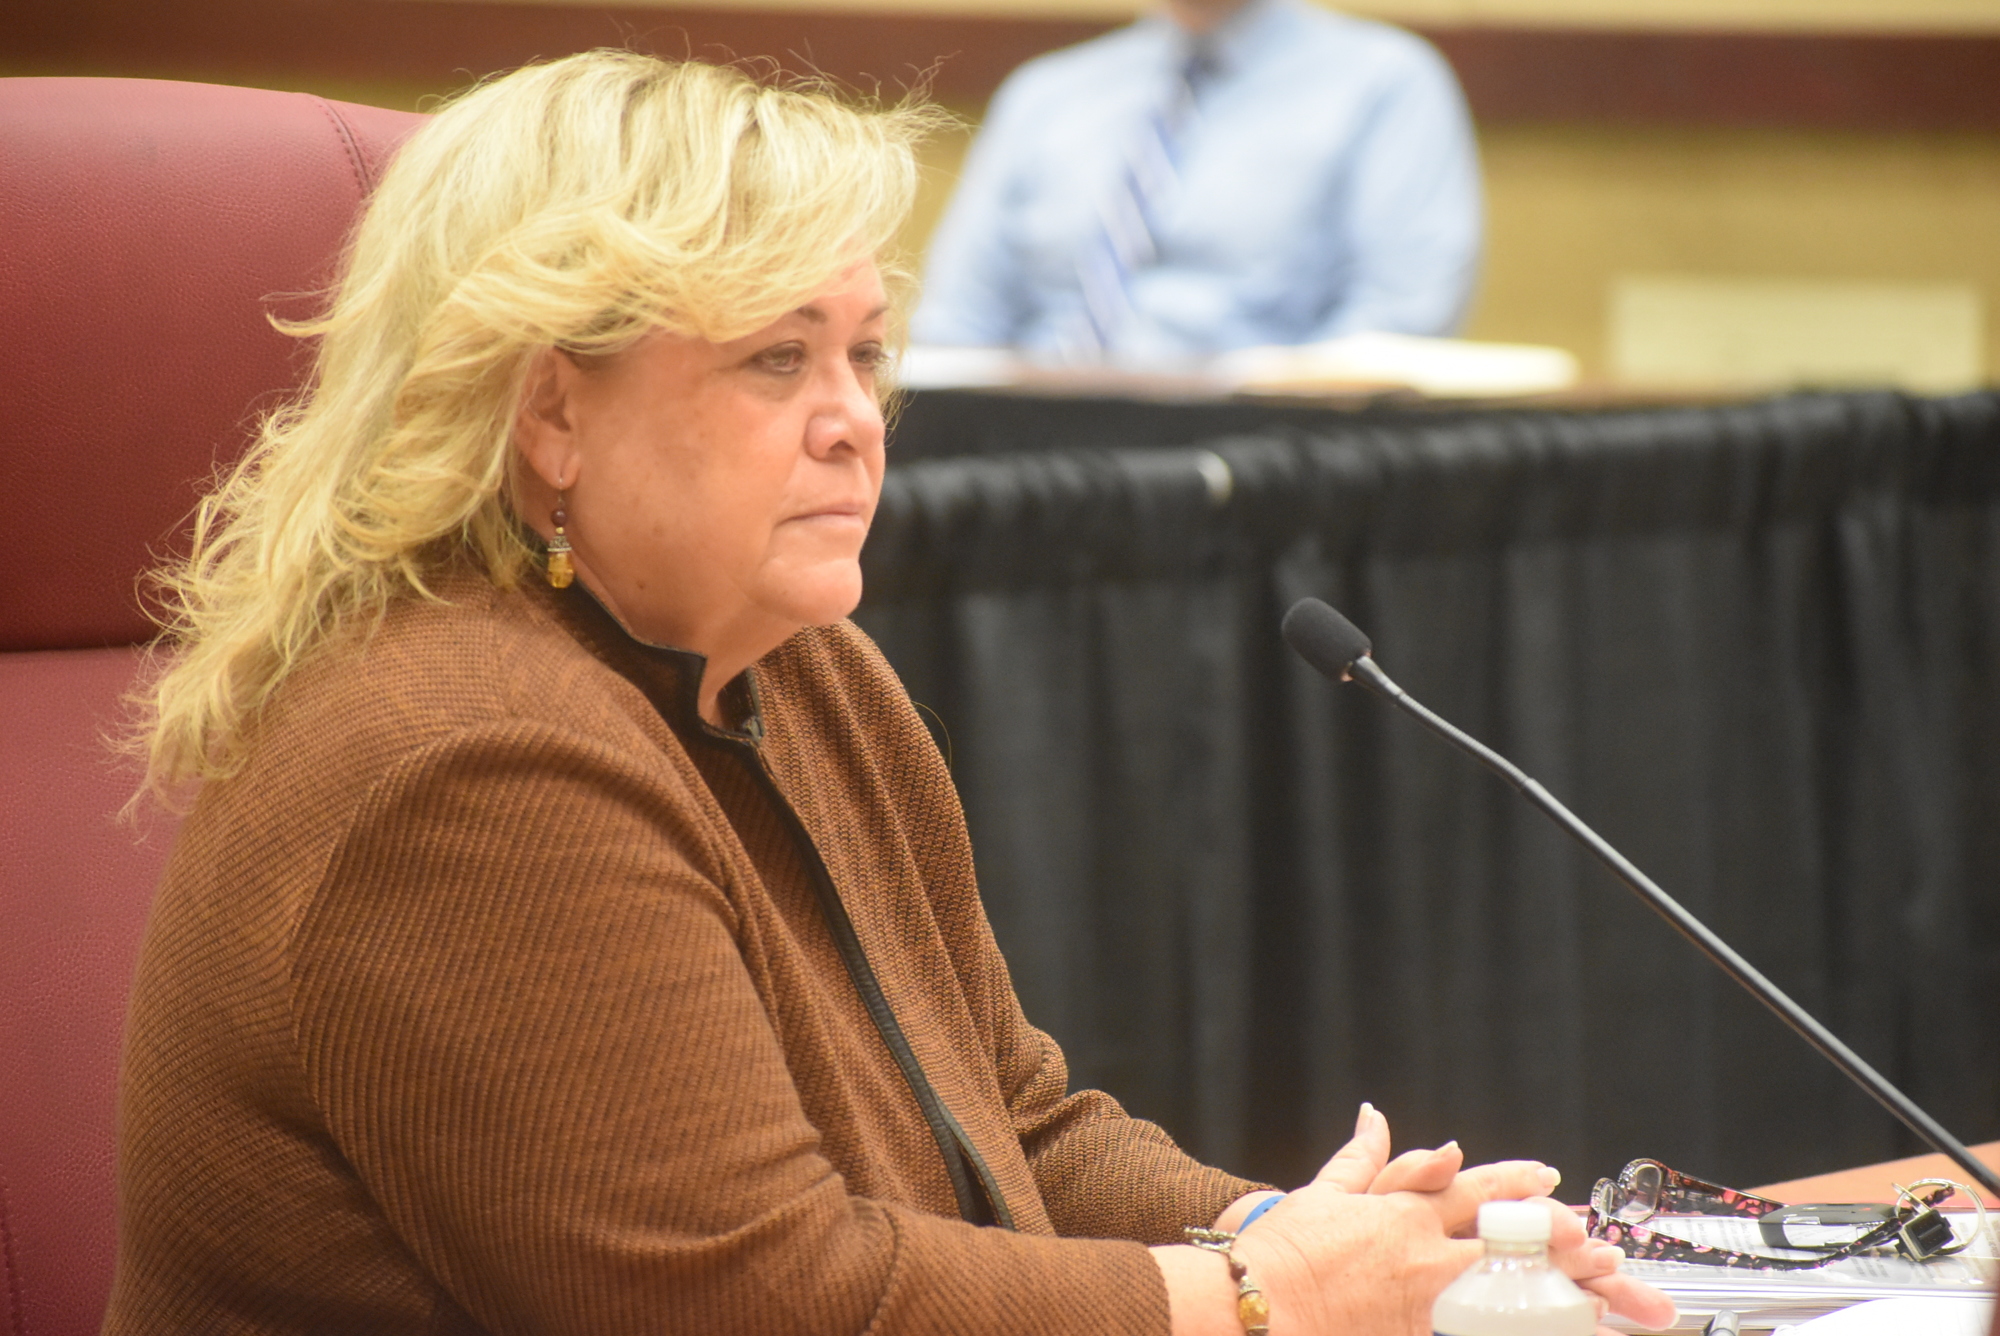 On Dec. 10, Manatee County commissioners voted unanimously to reconsider their Nov. 19 motion to give at least a 15-day notice before a vote could be taken to terminate Administrator Cheri Coryea’s contract.